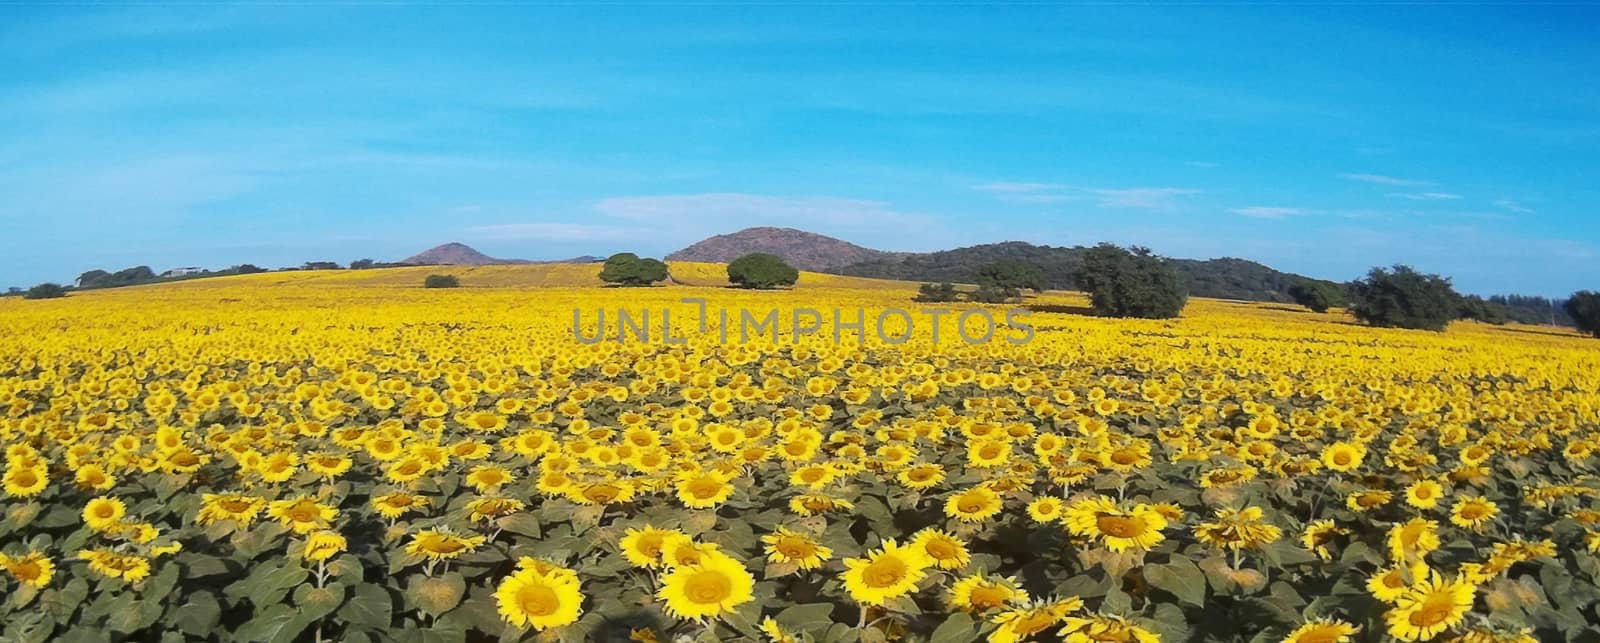 field of blooming sunflowers  by ideation90